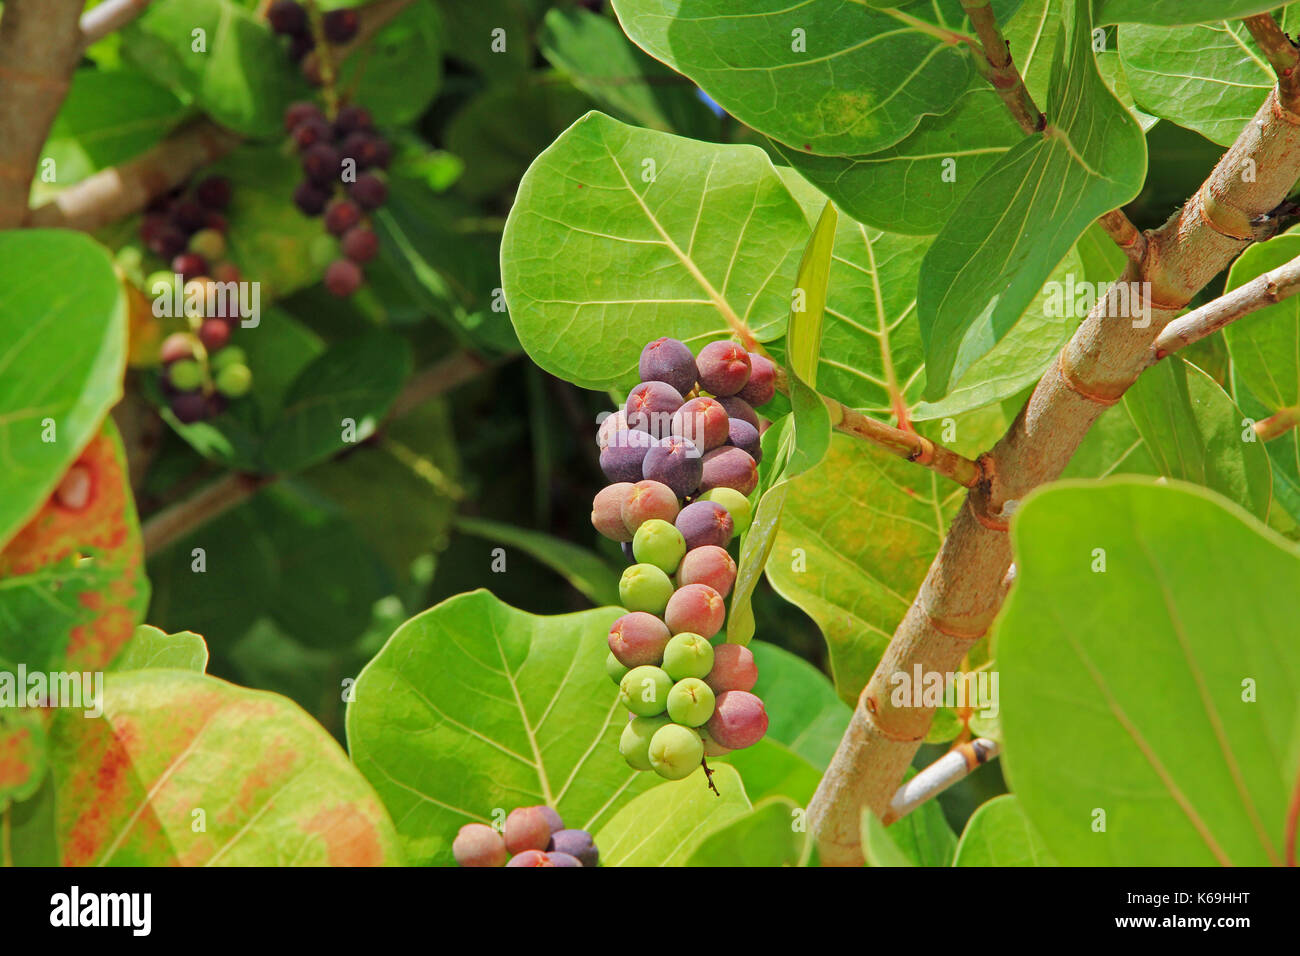 Close up View of Ripening Sea Grape Cluster Stock Photo